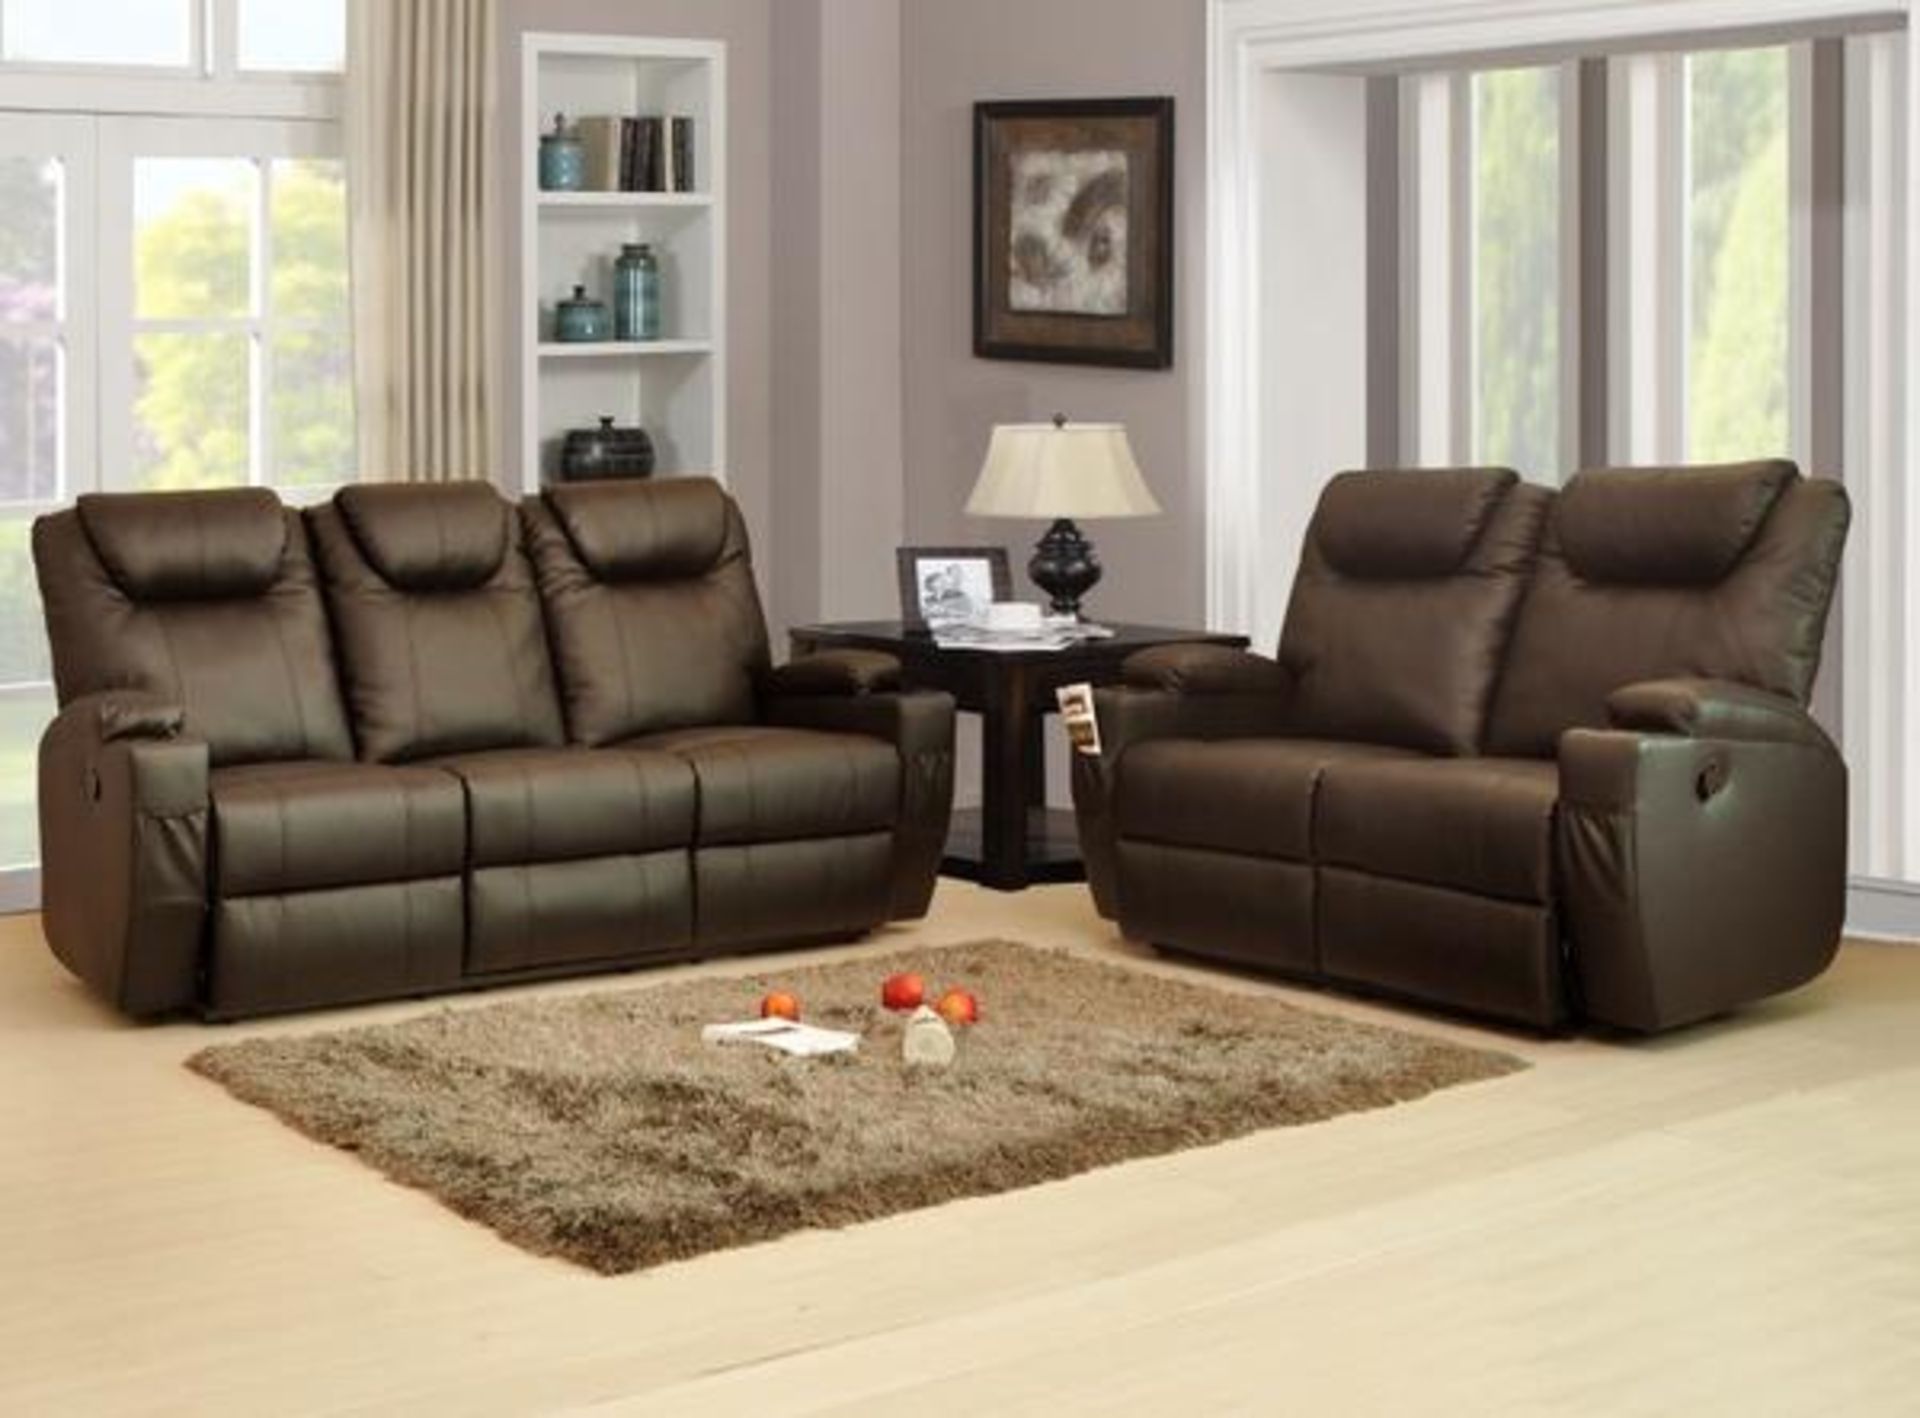 Brand New Boxed 3 Seater Lazyboy Black Leather Manual Reclining Sofa Plus 2æ